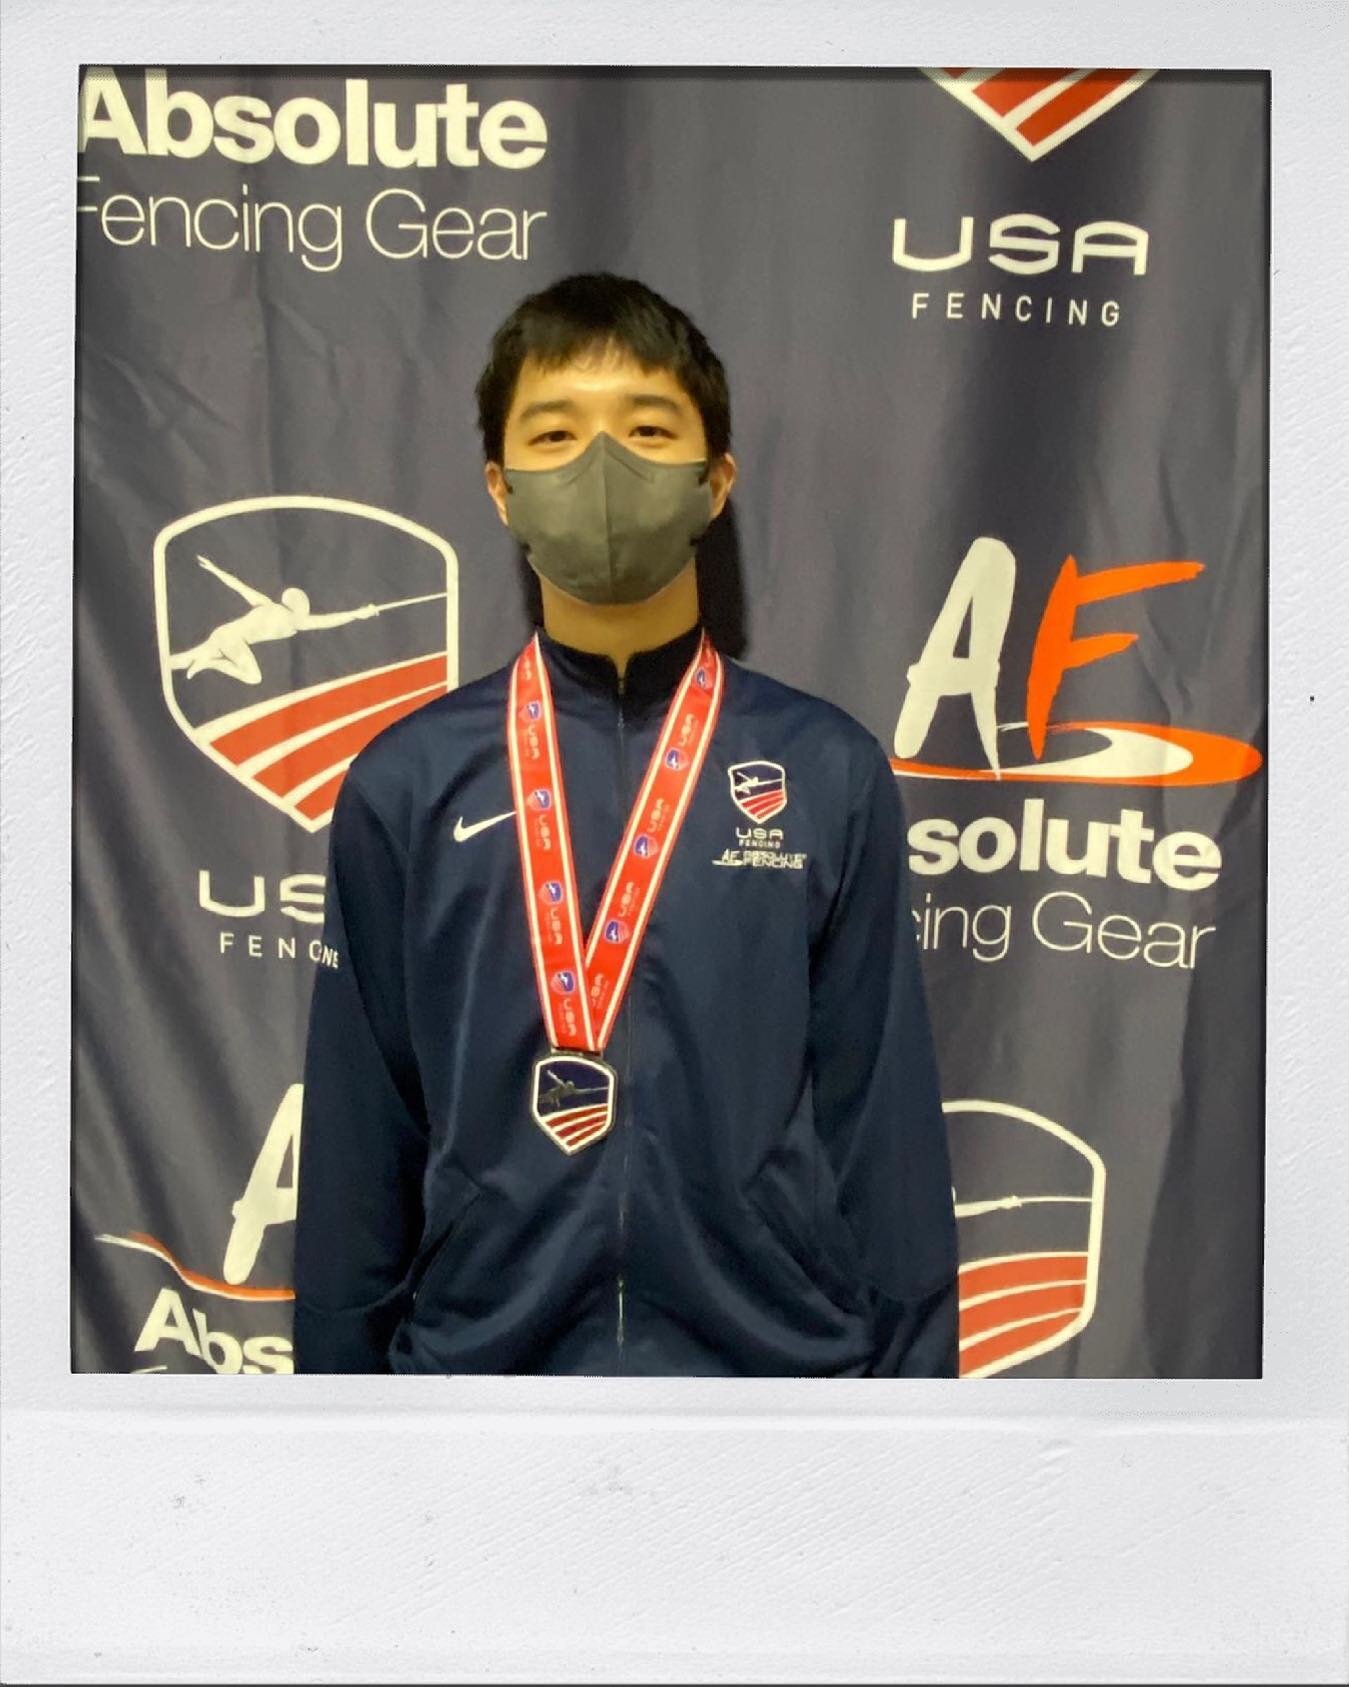 Catching up on all of the results! Ethan earns a place on the podium in CMF with a 6th place finish. More applause - congratulations. #marxfencingacademy #acenterforexcellence #usfencing